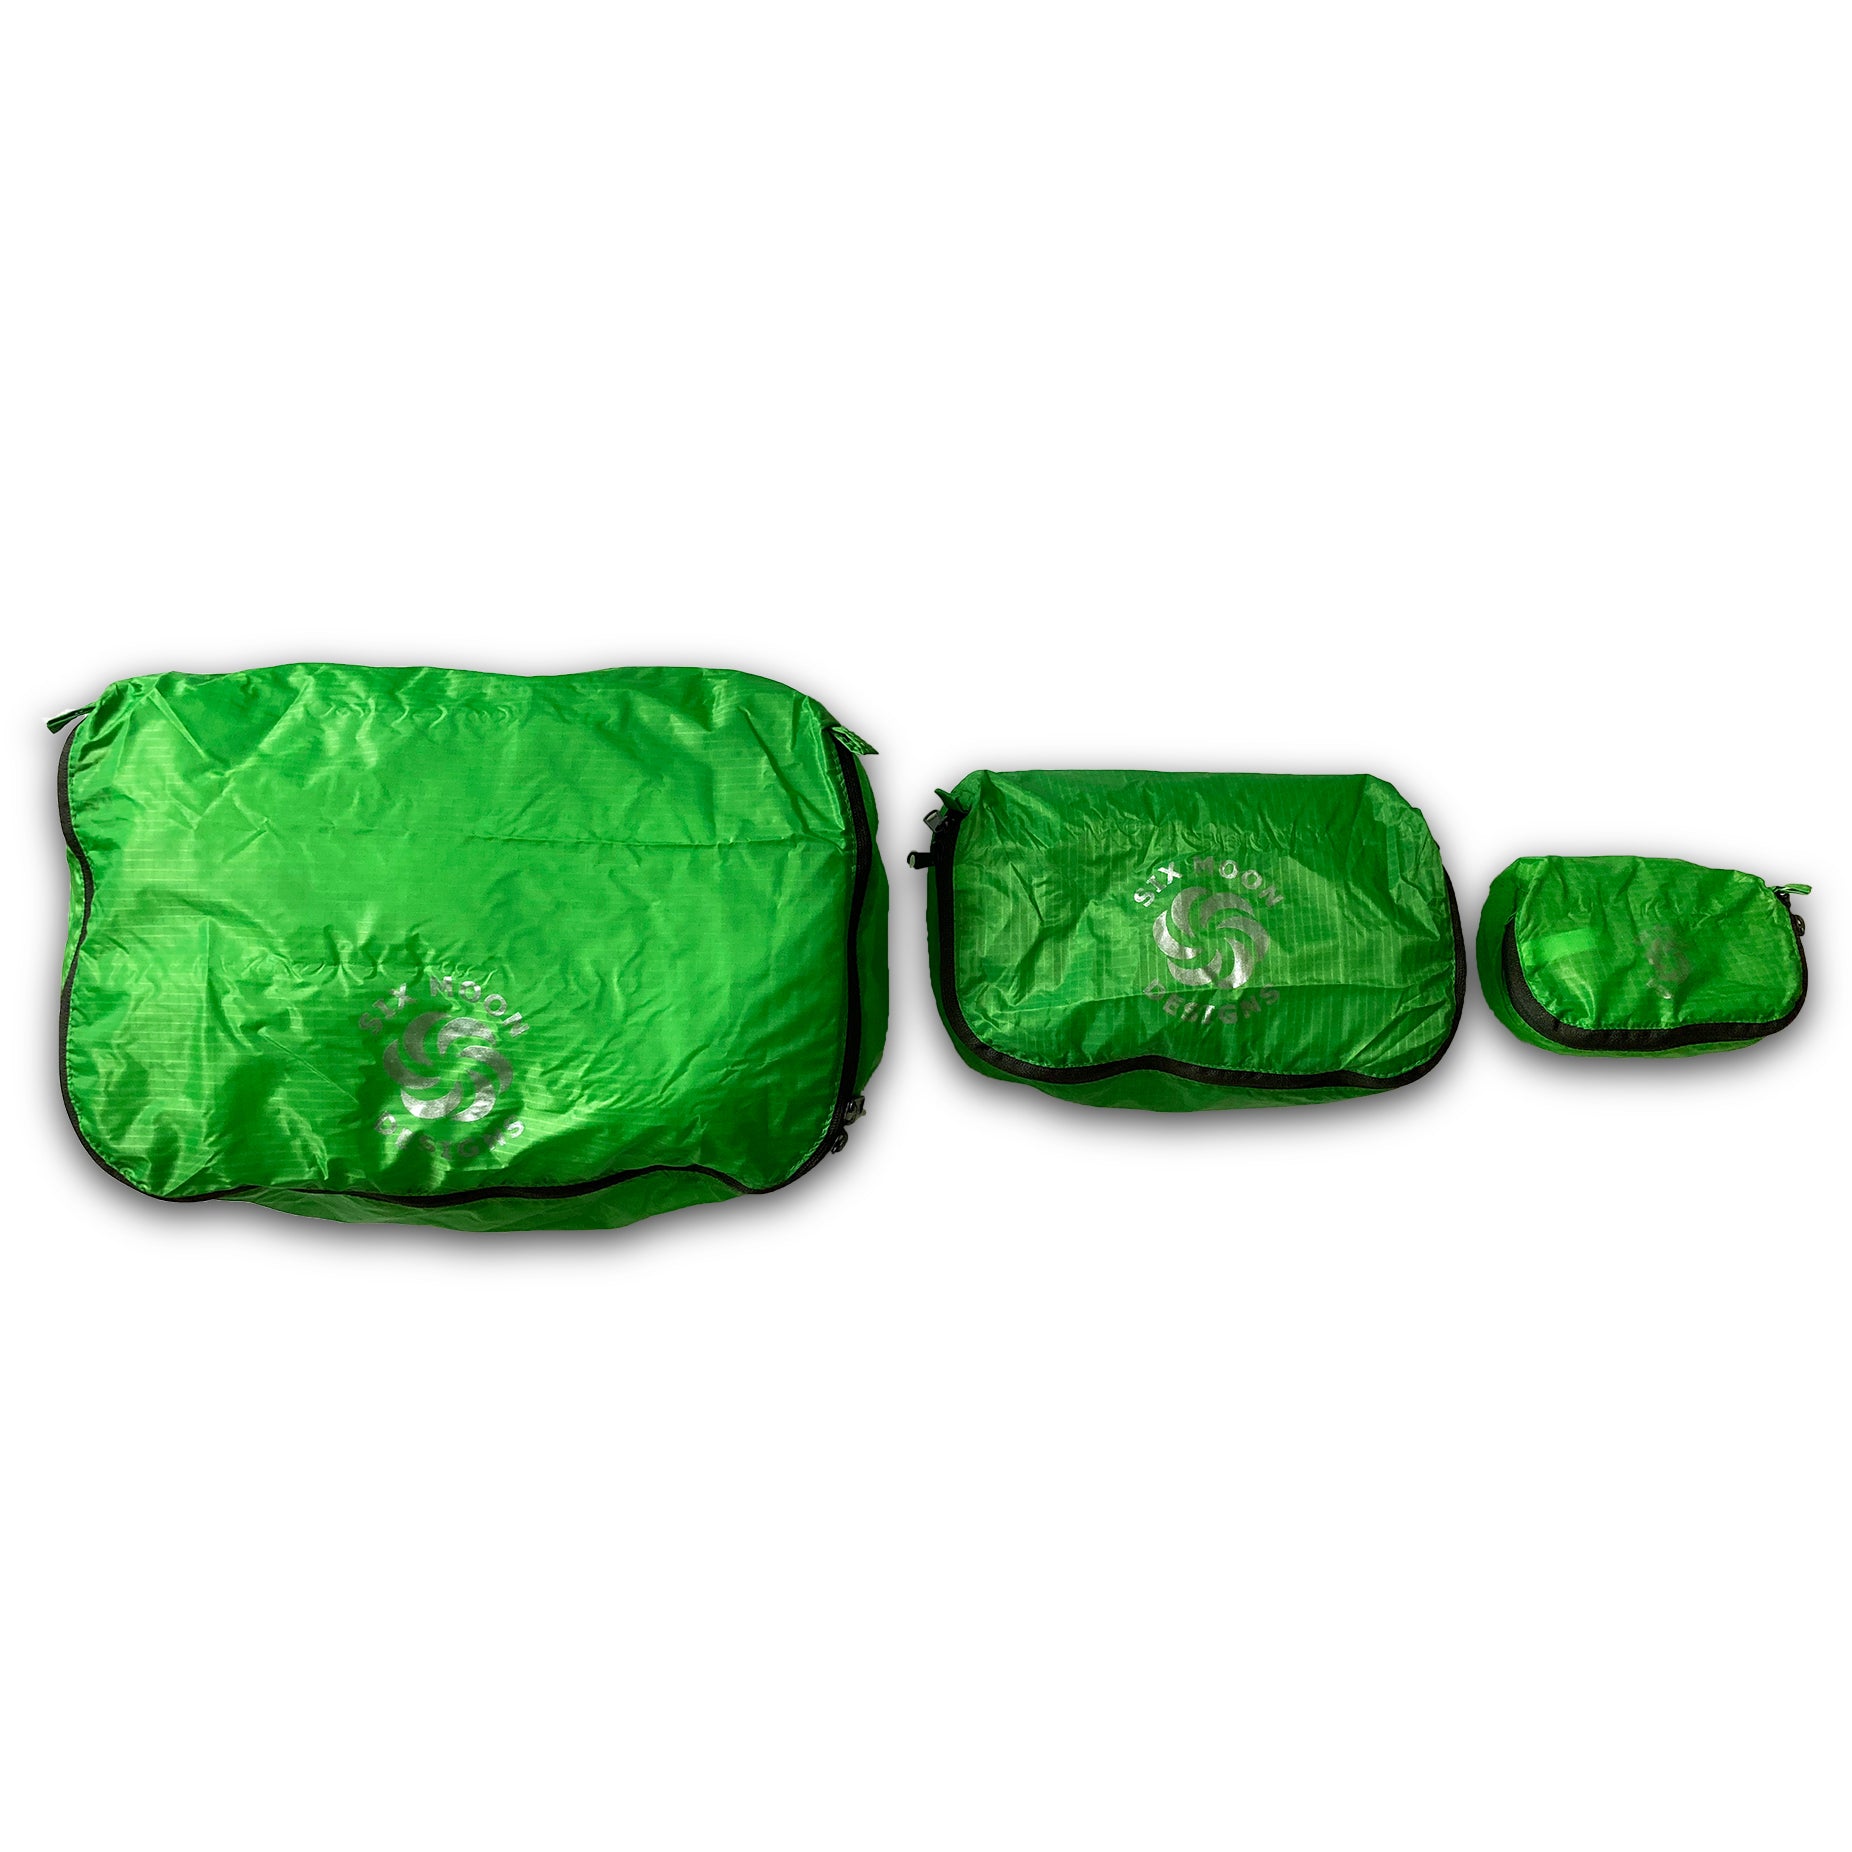 Green Six Moon Designs Pack Pod stuff sacks in all three sizes side by side